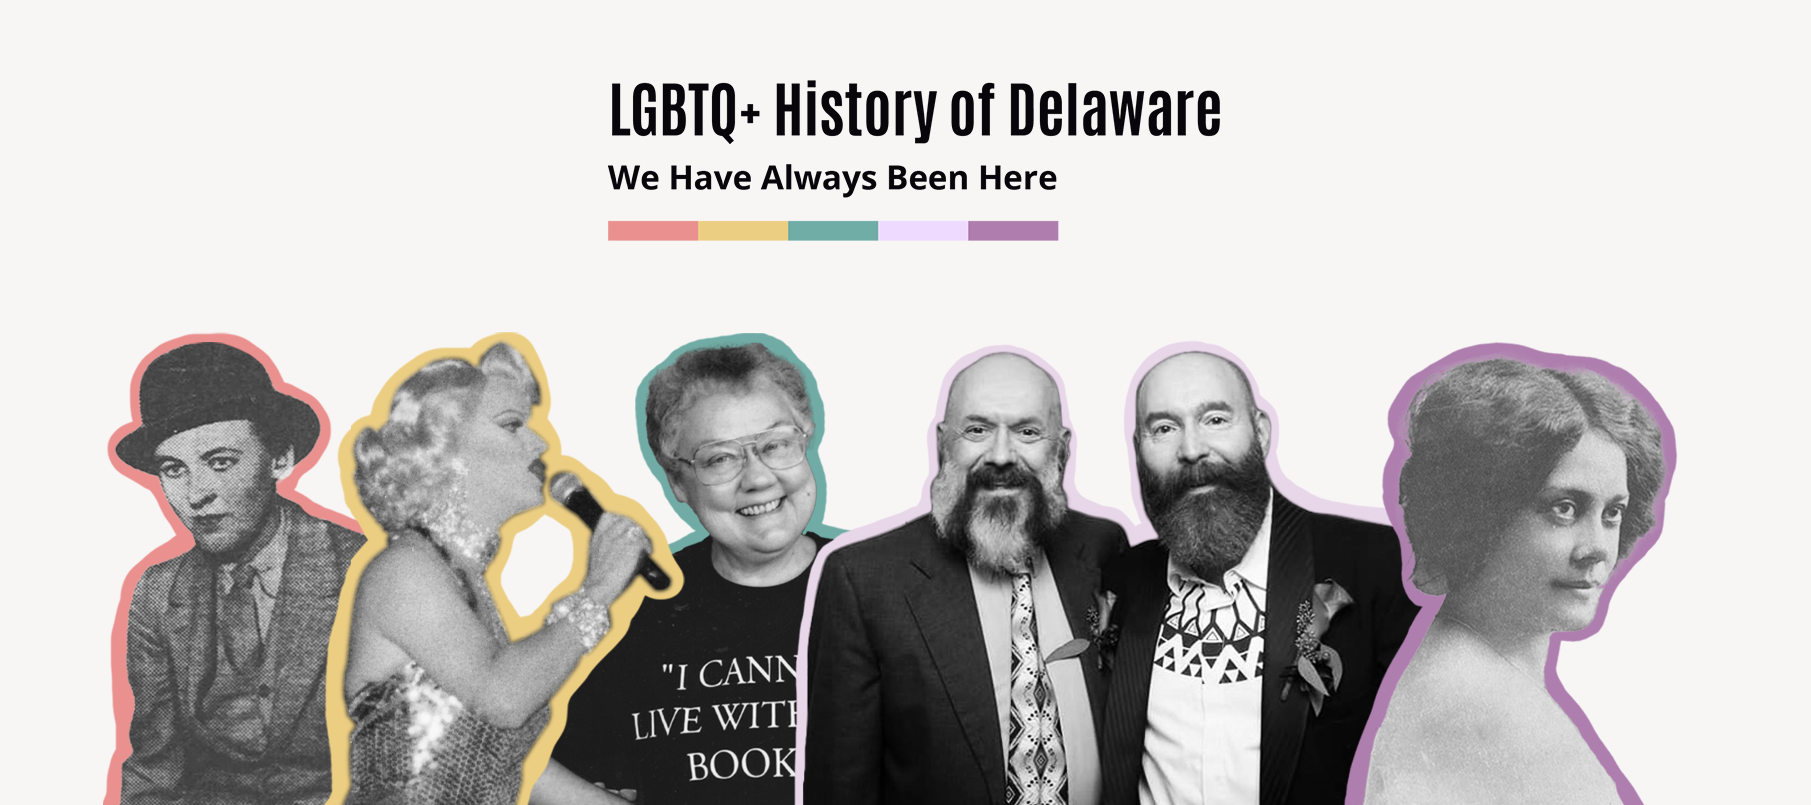 Collage of black and white portrait's of queer people, multiple different ages and time period throughout history. Each person is outlined in a different brand color in order of red, yellow, teal, light purple, and dark purple in that order.